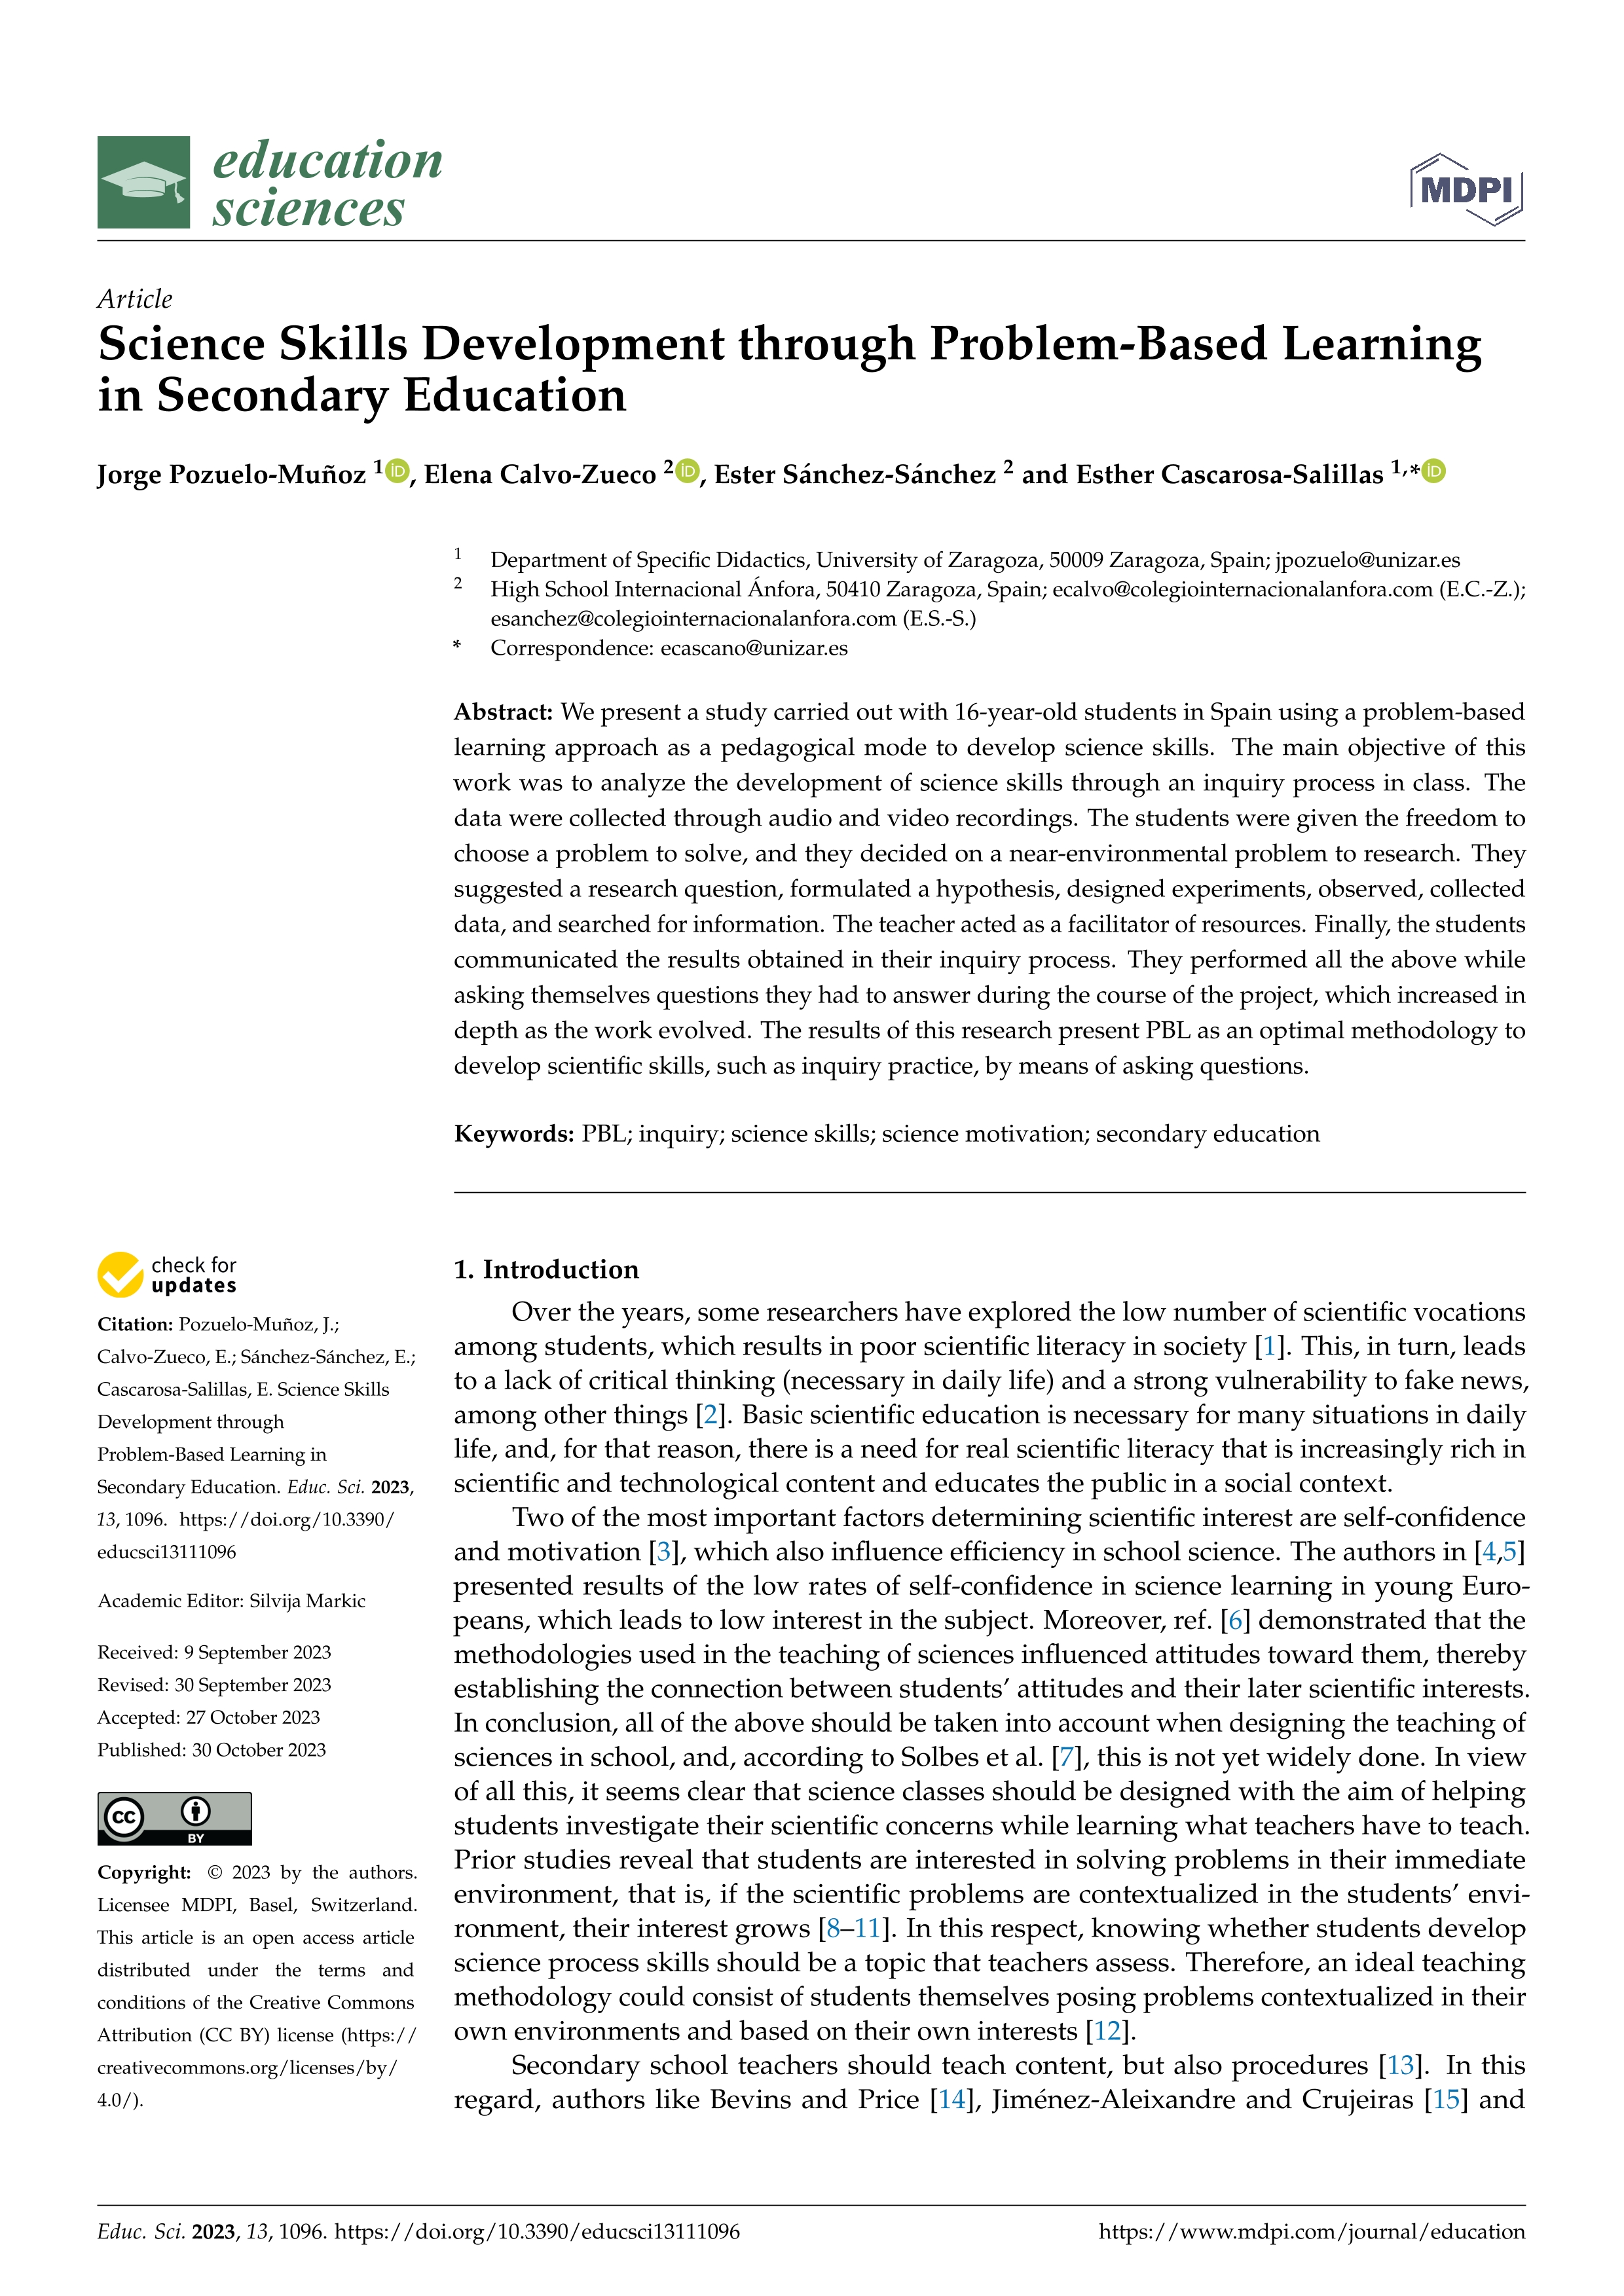 Science skills development through problem-based learning in secondary education